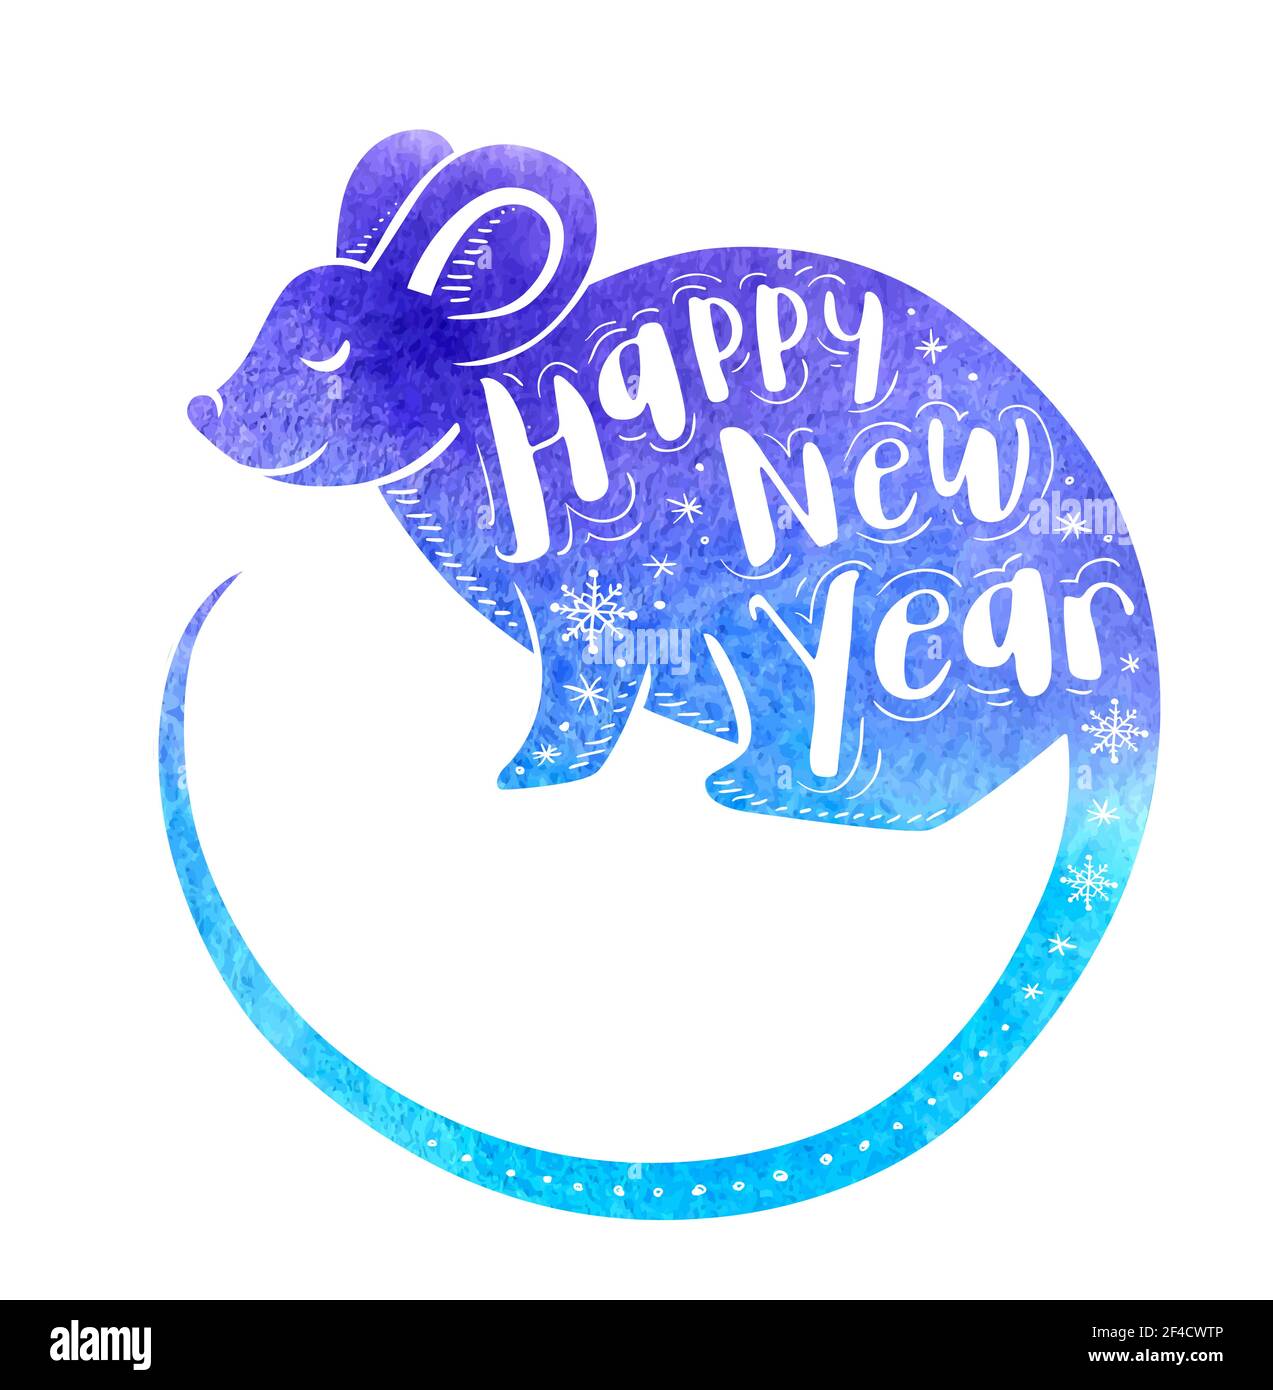 Cute rat symbol of Chinese zodiac for 2020 new year. Blue watercolor silhouette of rat and lettering. Hand drawn vector illustration Stock Vector